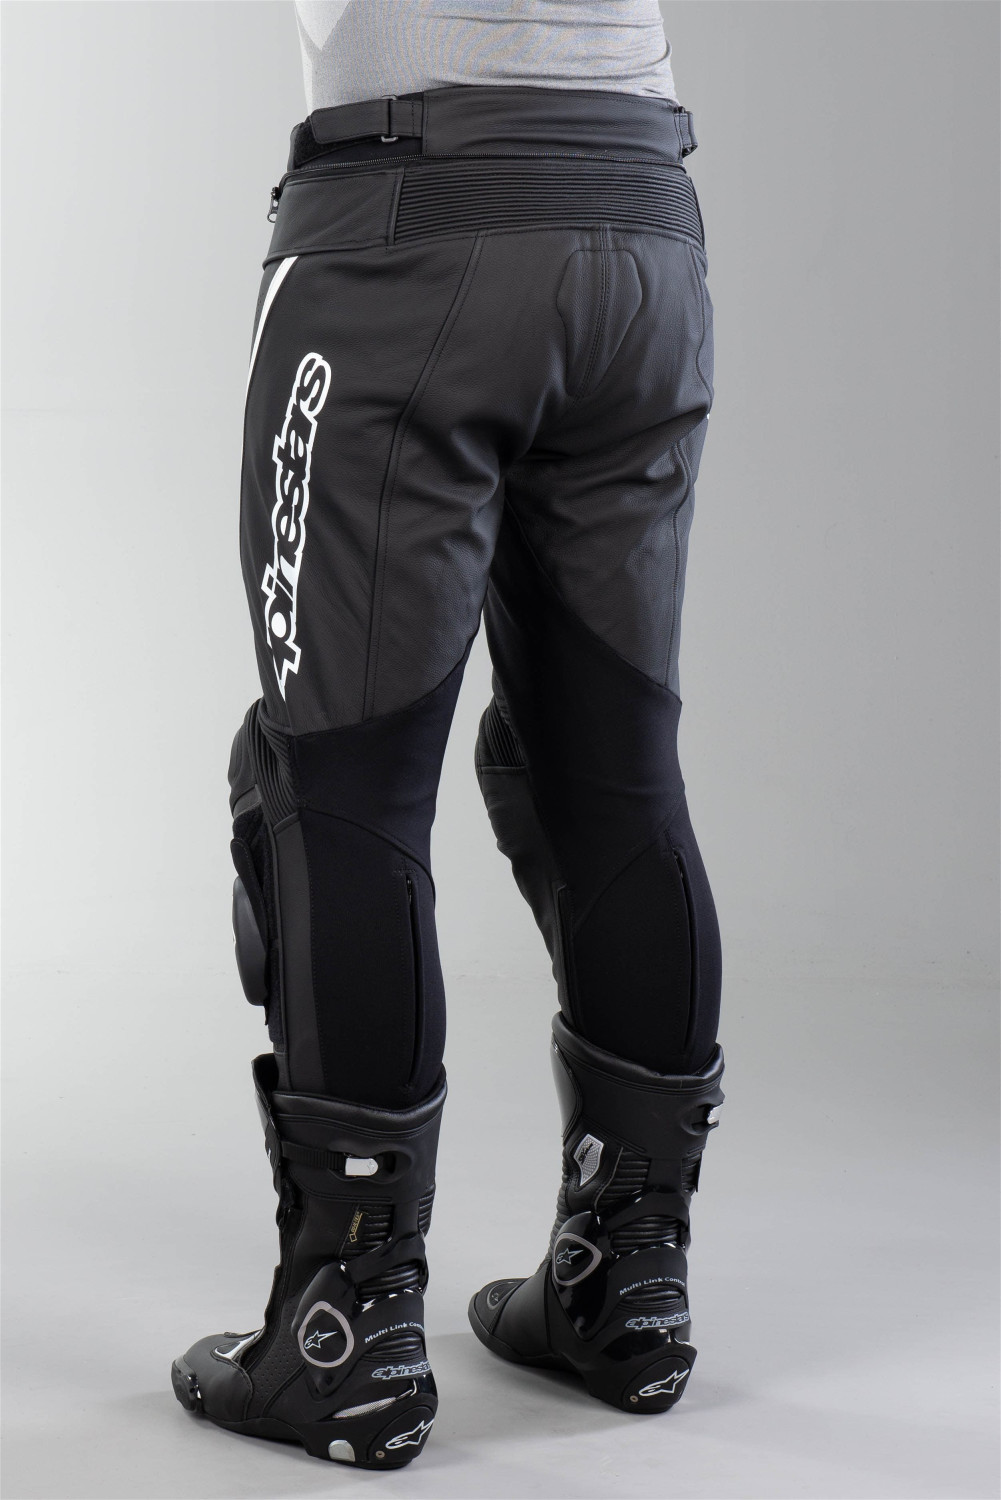 Alpinestars Raider Drystar Pants Review  Leave the Leathers Home